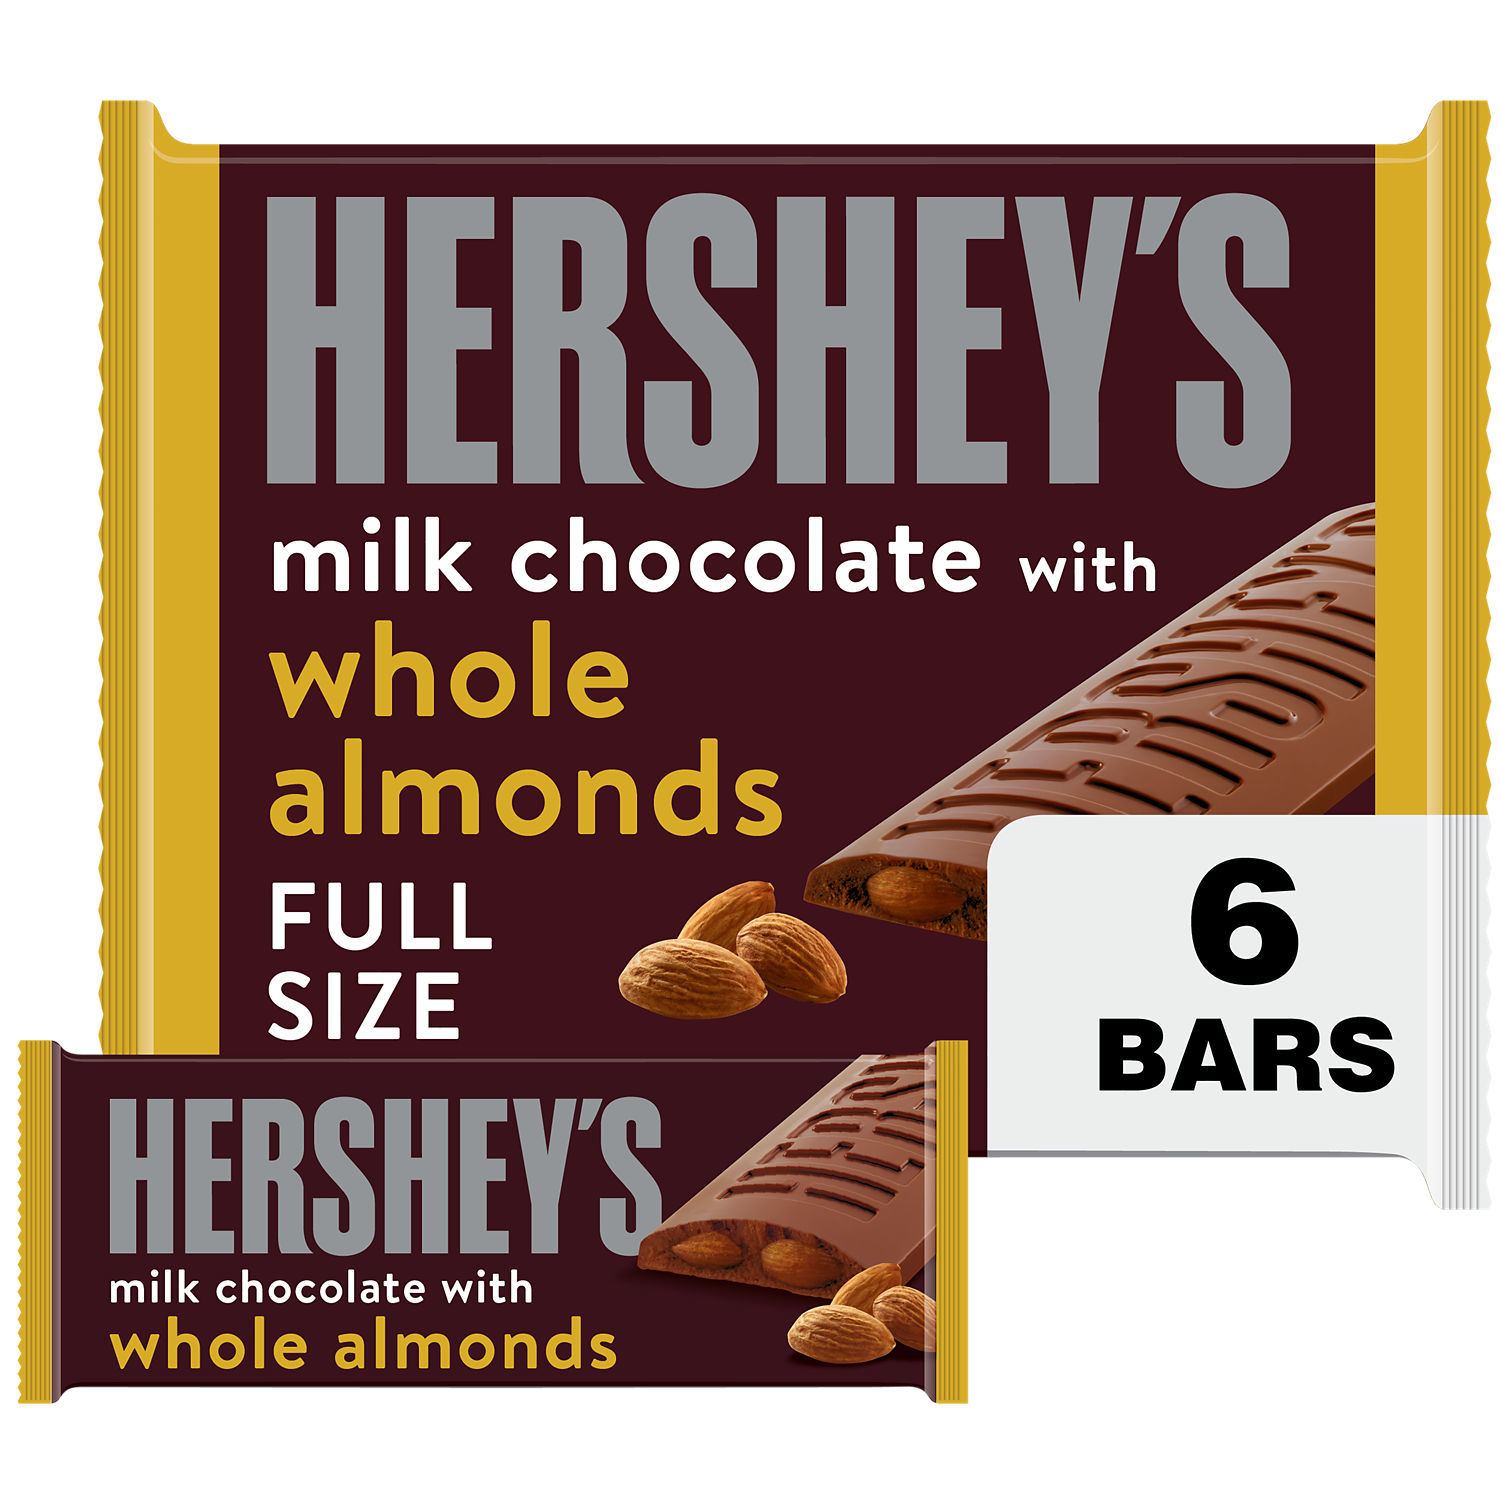 Hershey's Milk Chocolate with Whole Almonds Candy, Bars 1.45 oz, 6 Count - image 1 of 9